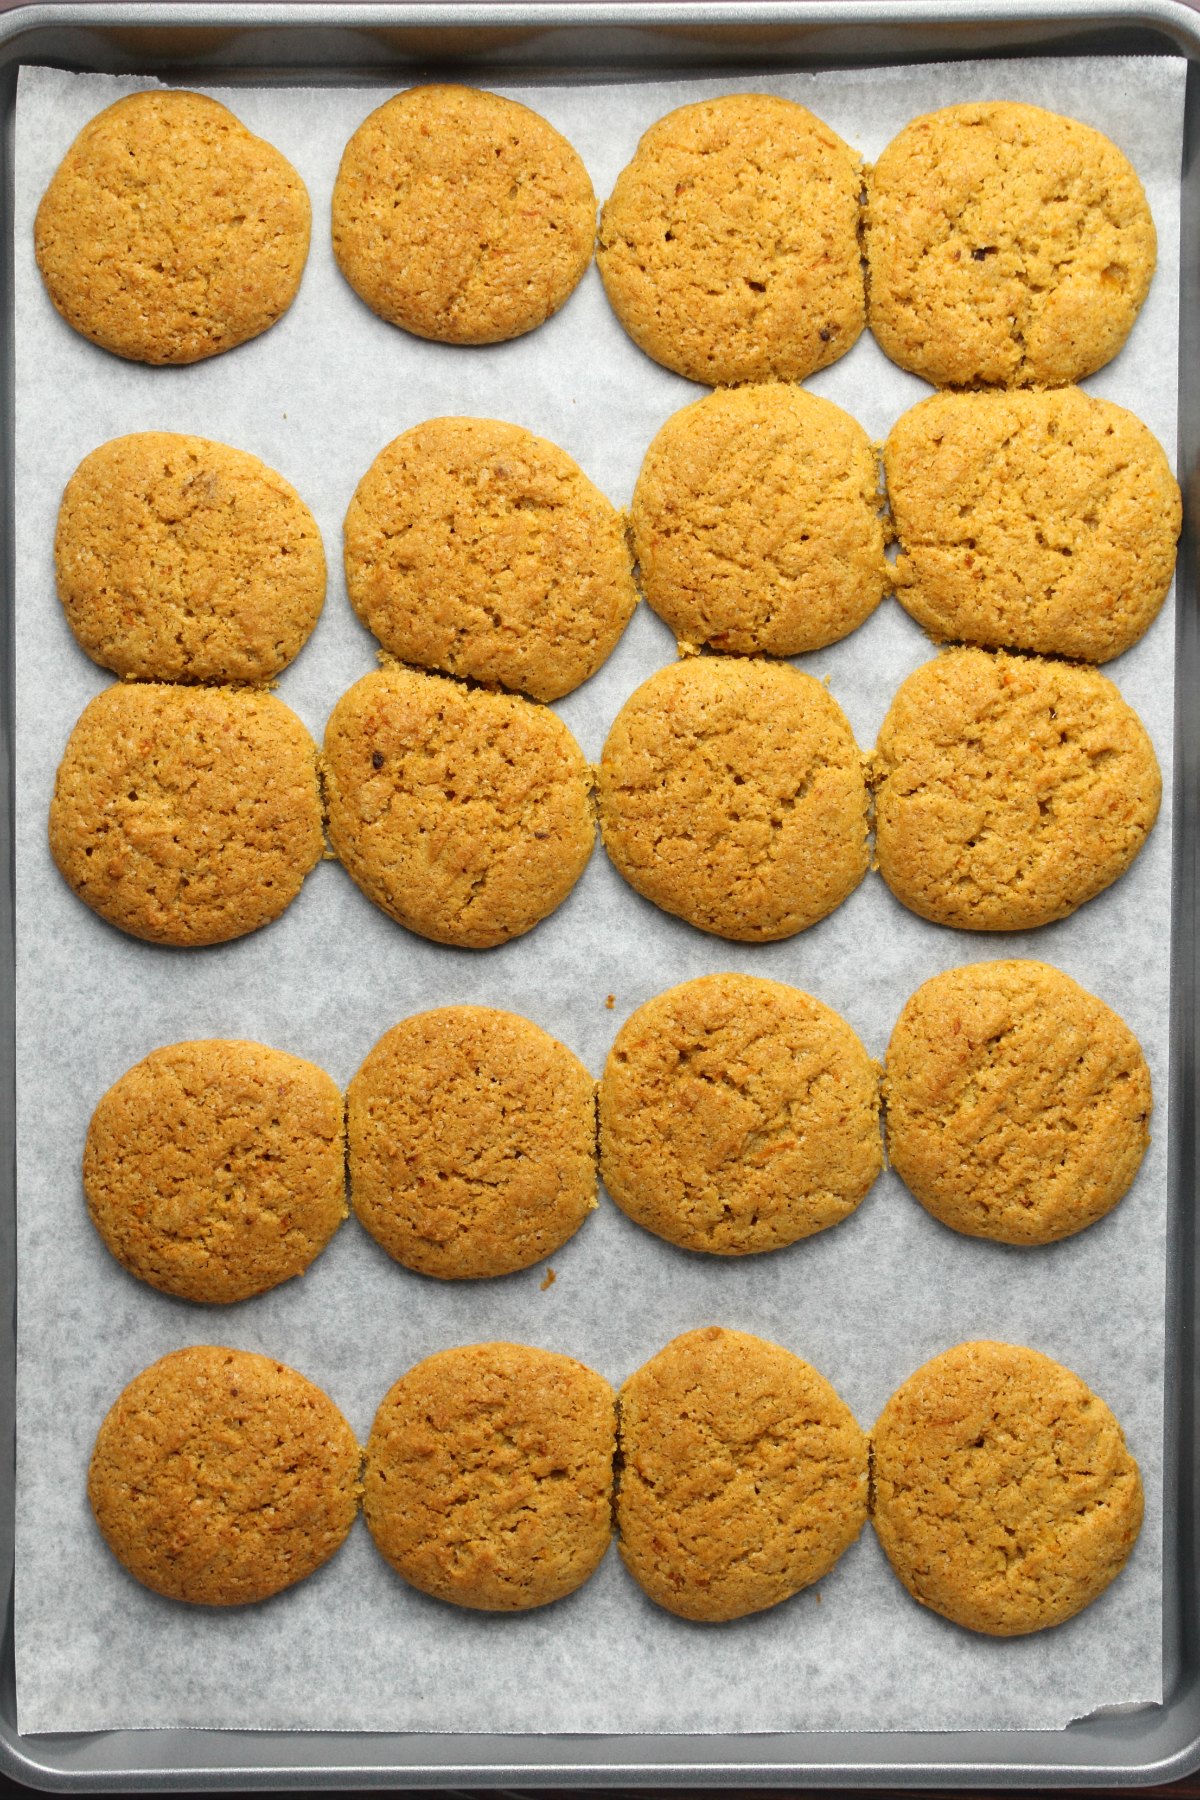 Freshly baked pumpkin cookies on a parchment lined baking tray.